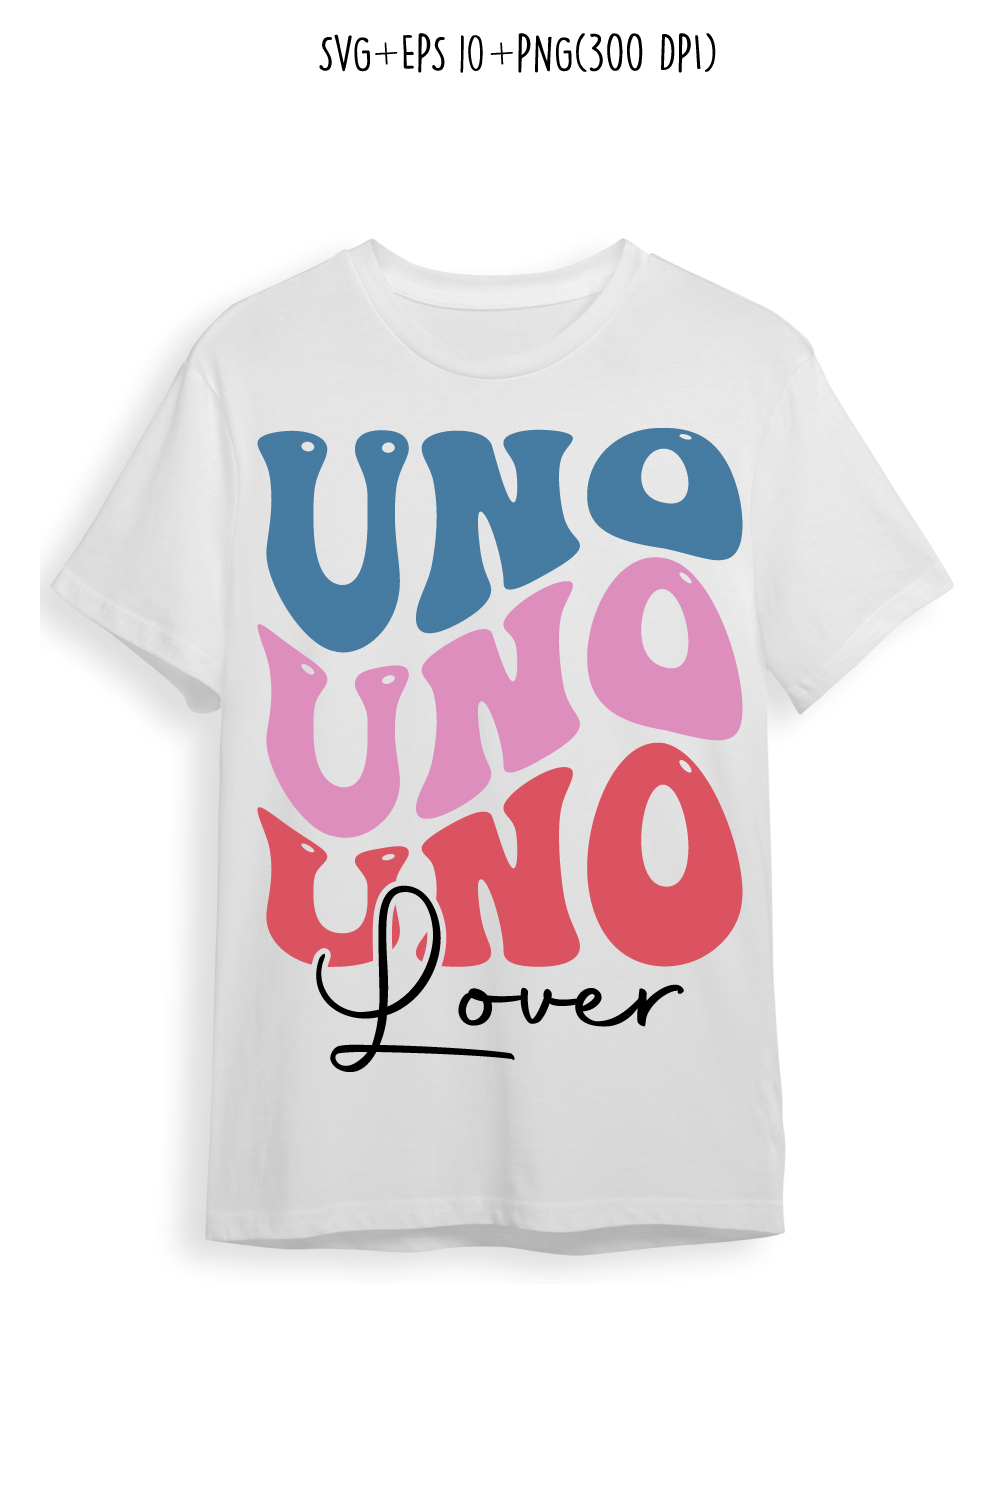 Uno lover indoor game retro typography design for t-shirts, cards, frame artwork, phone cases, bags, mugs, stickers, tumblers, print, etc pinterest preview image.